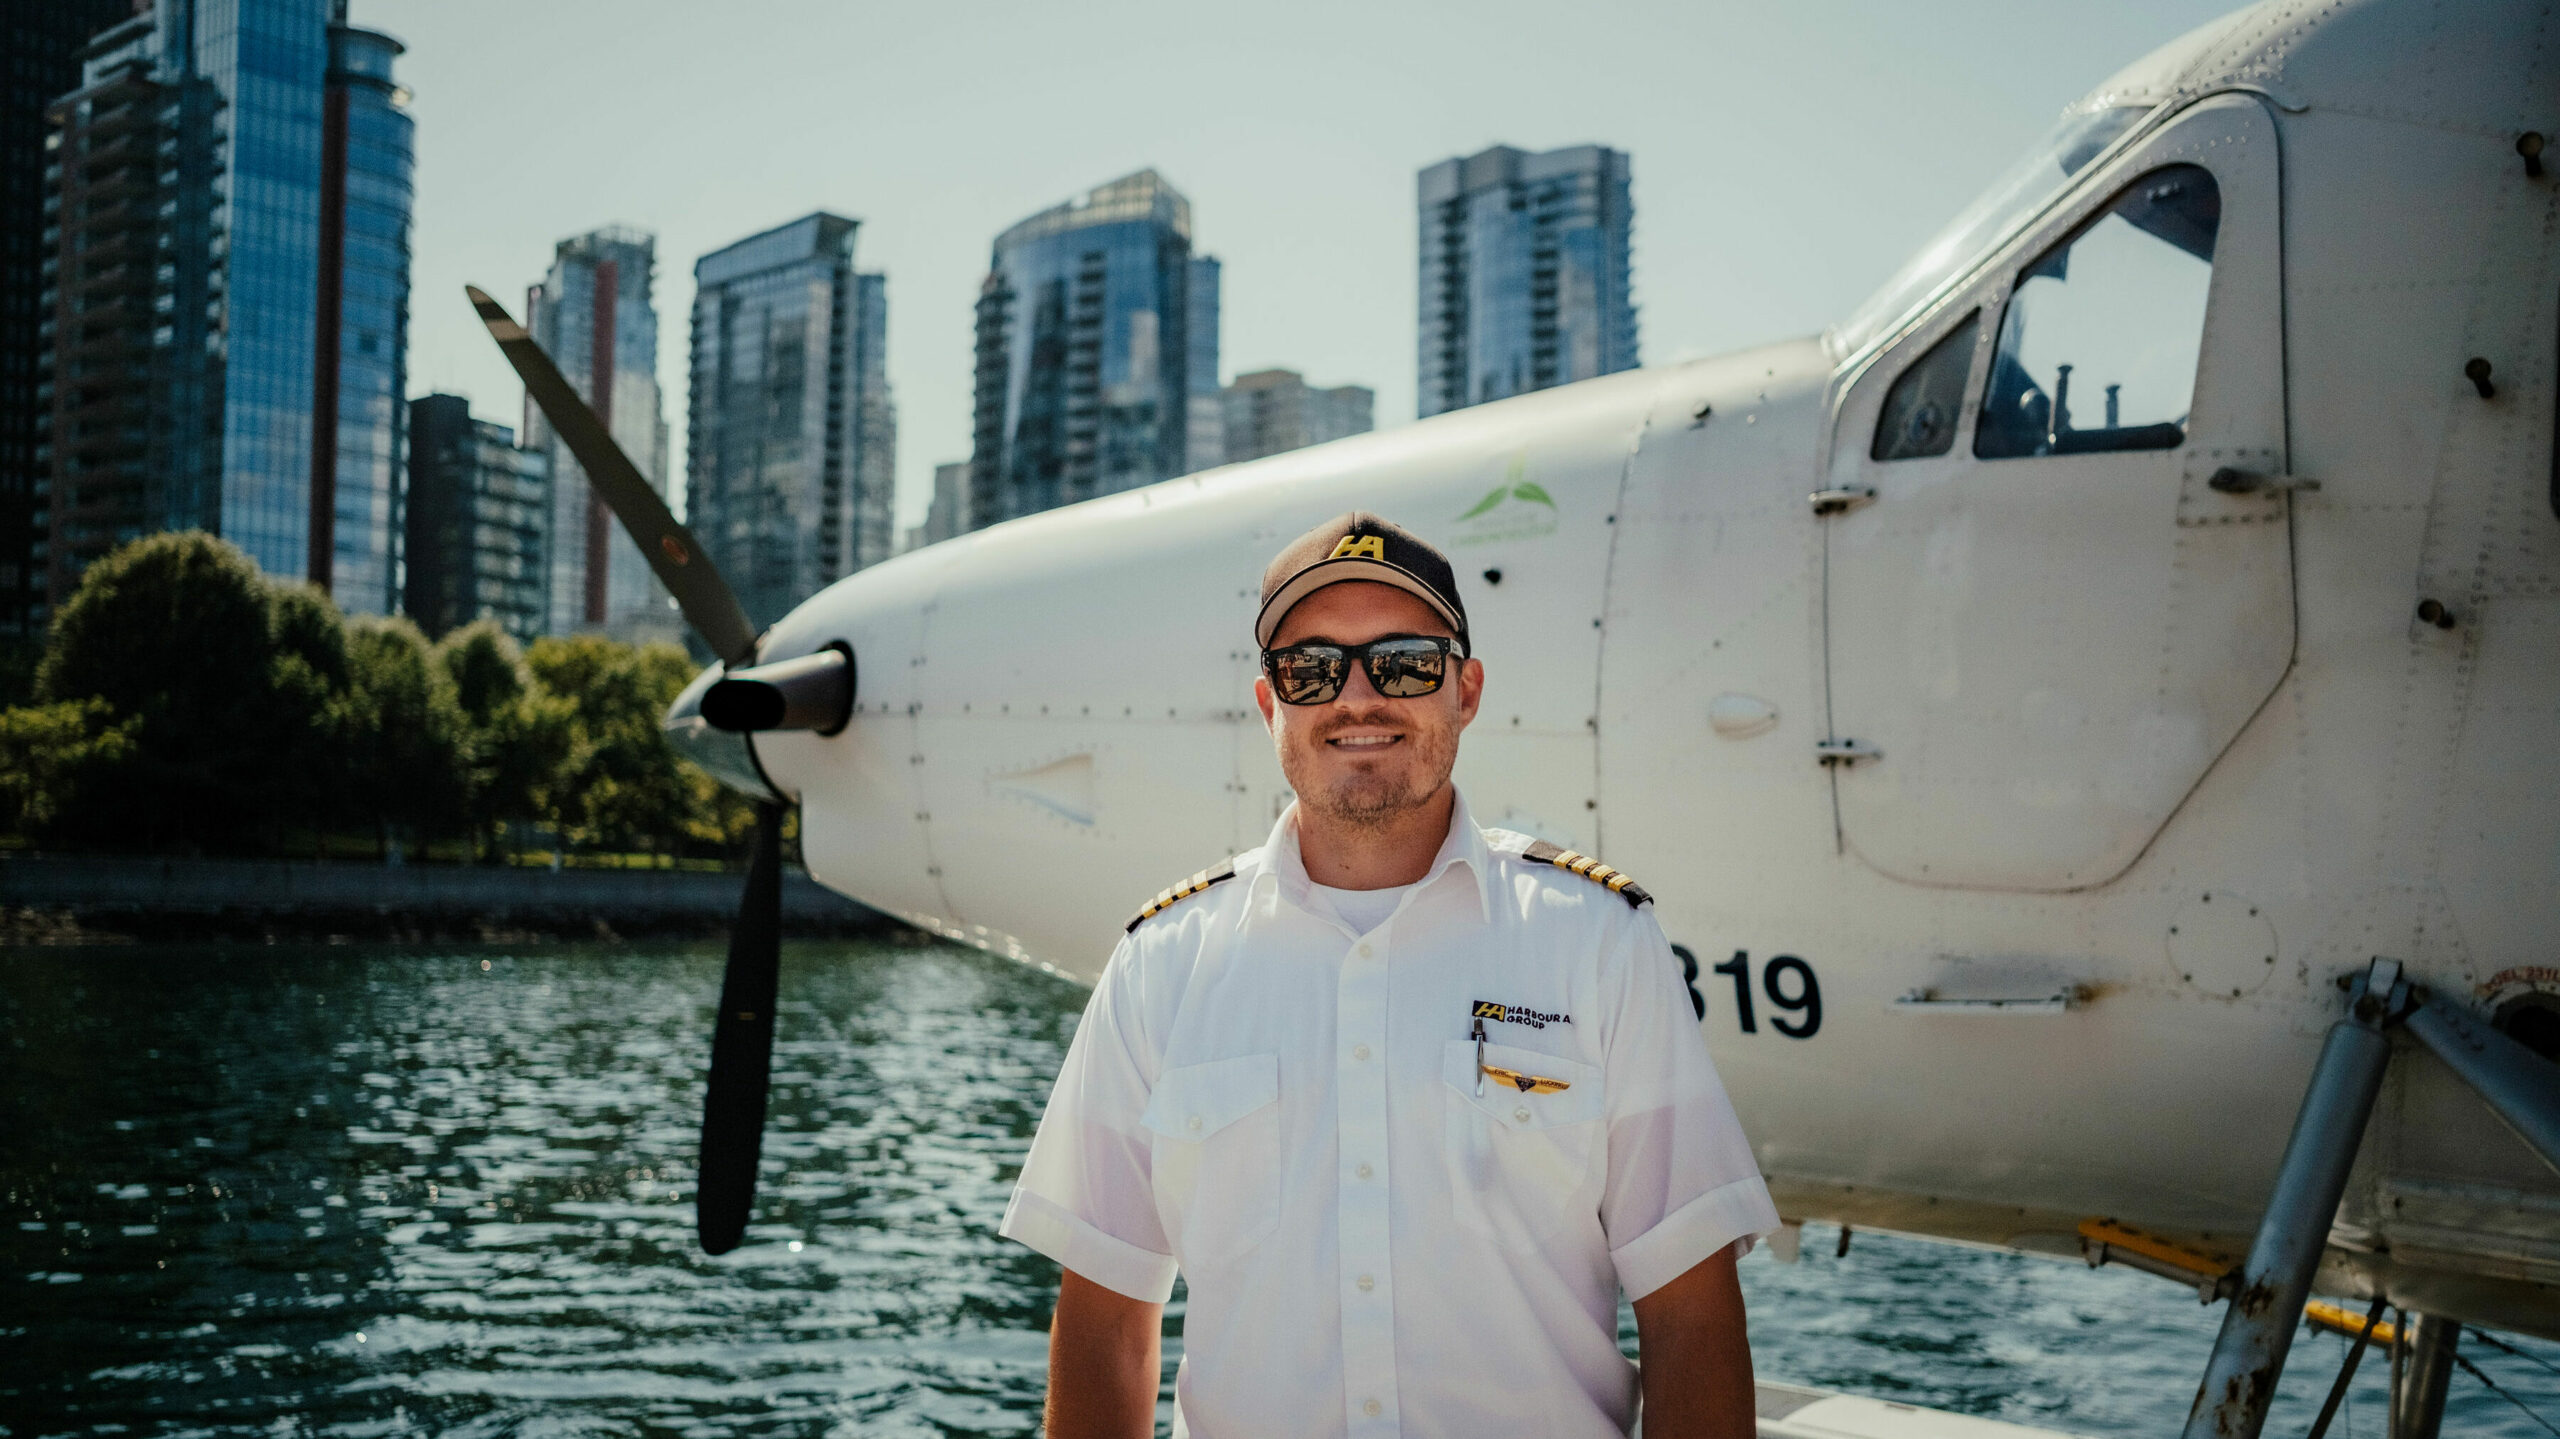 A pilot smiles in front of his plane, parked in front of a scenic city harbour.